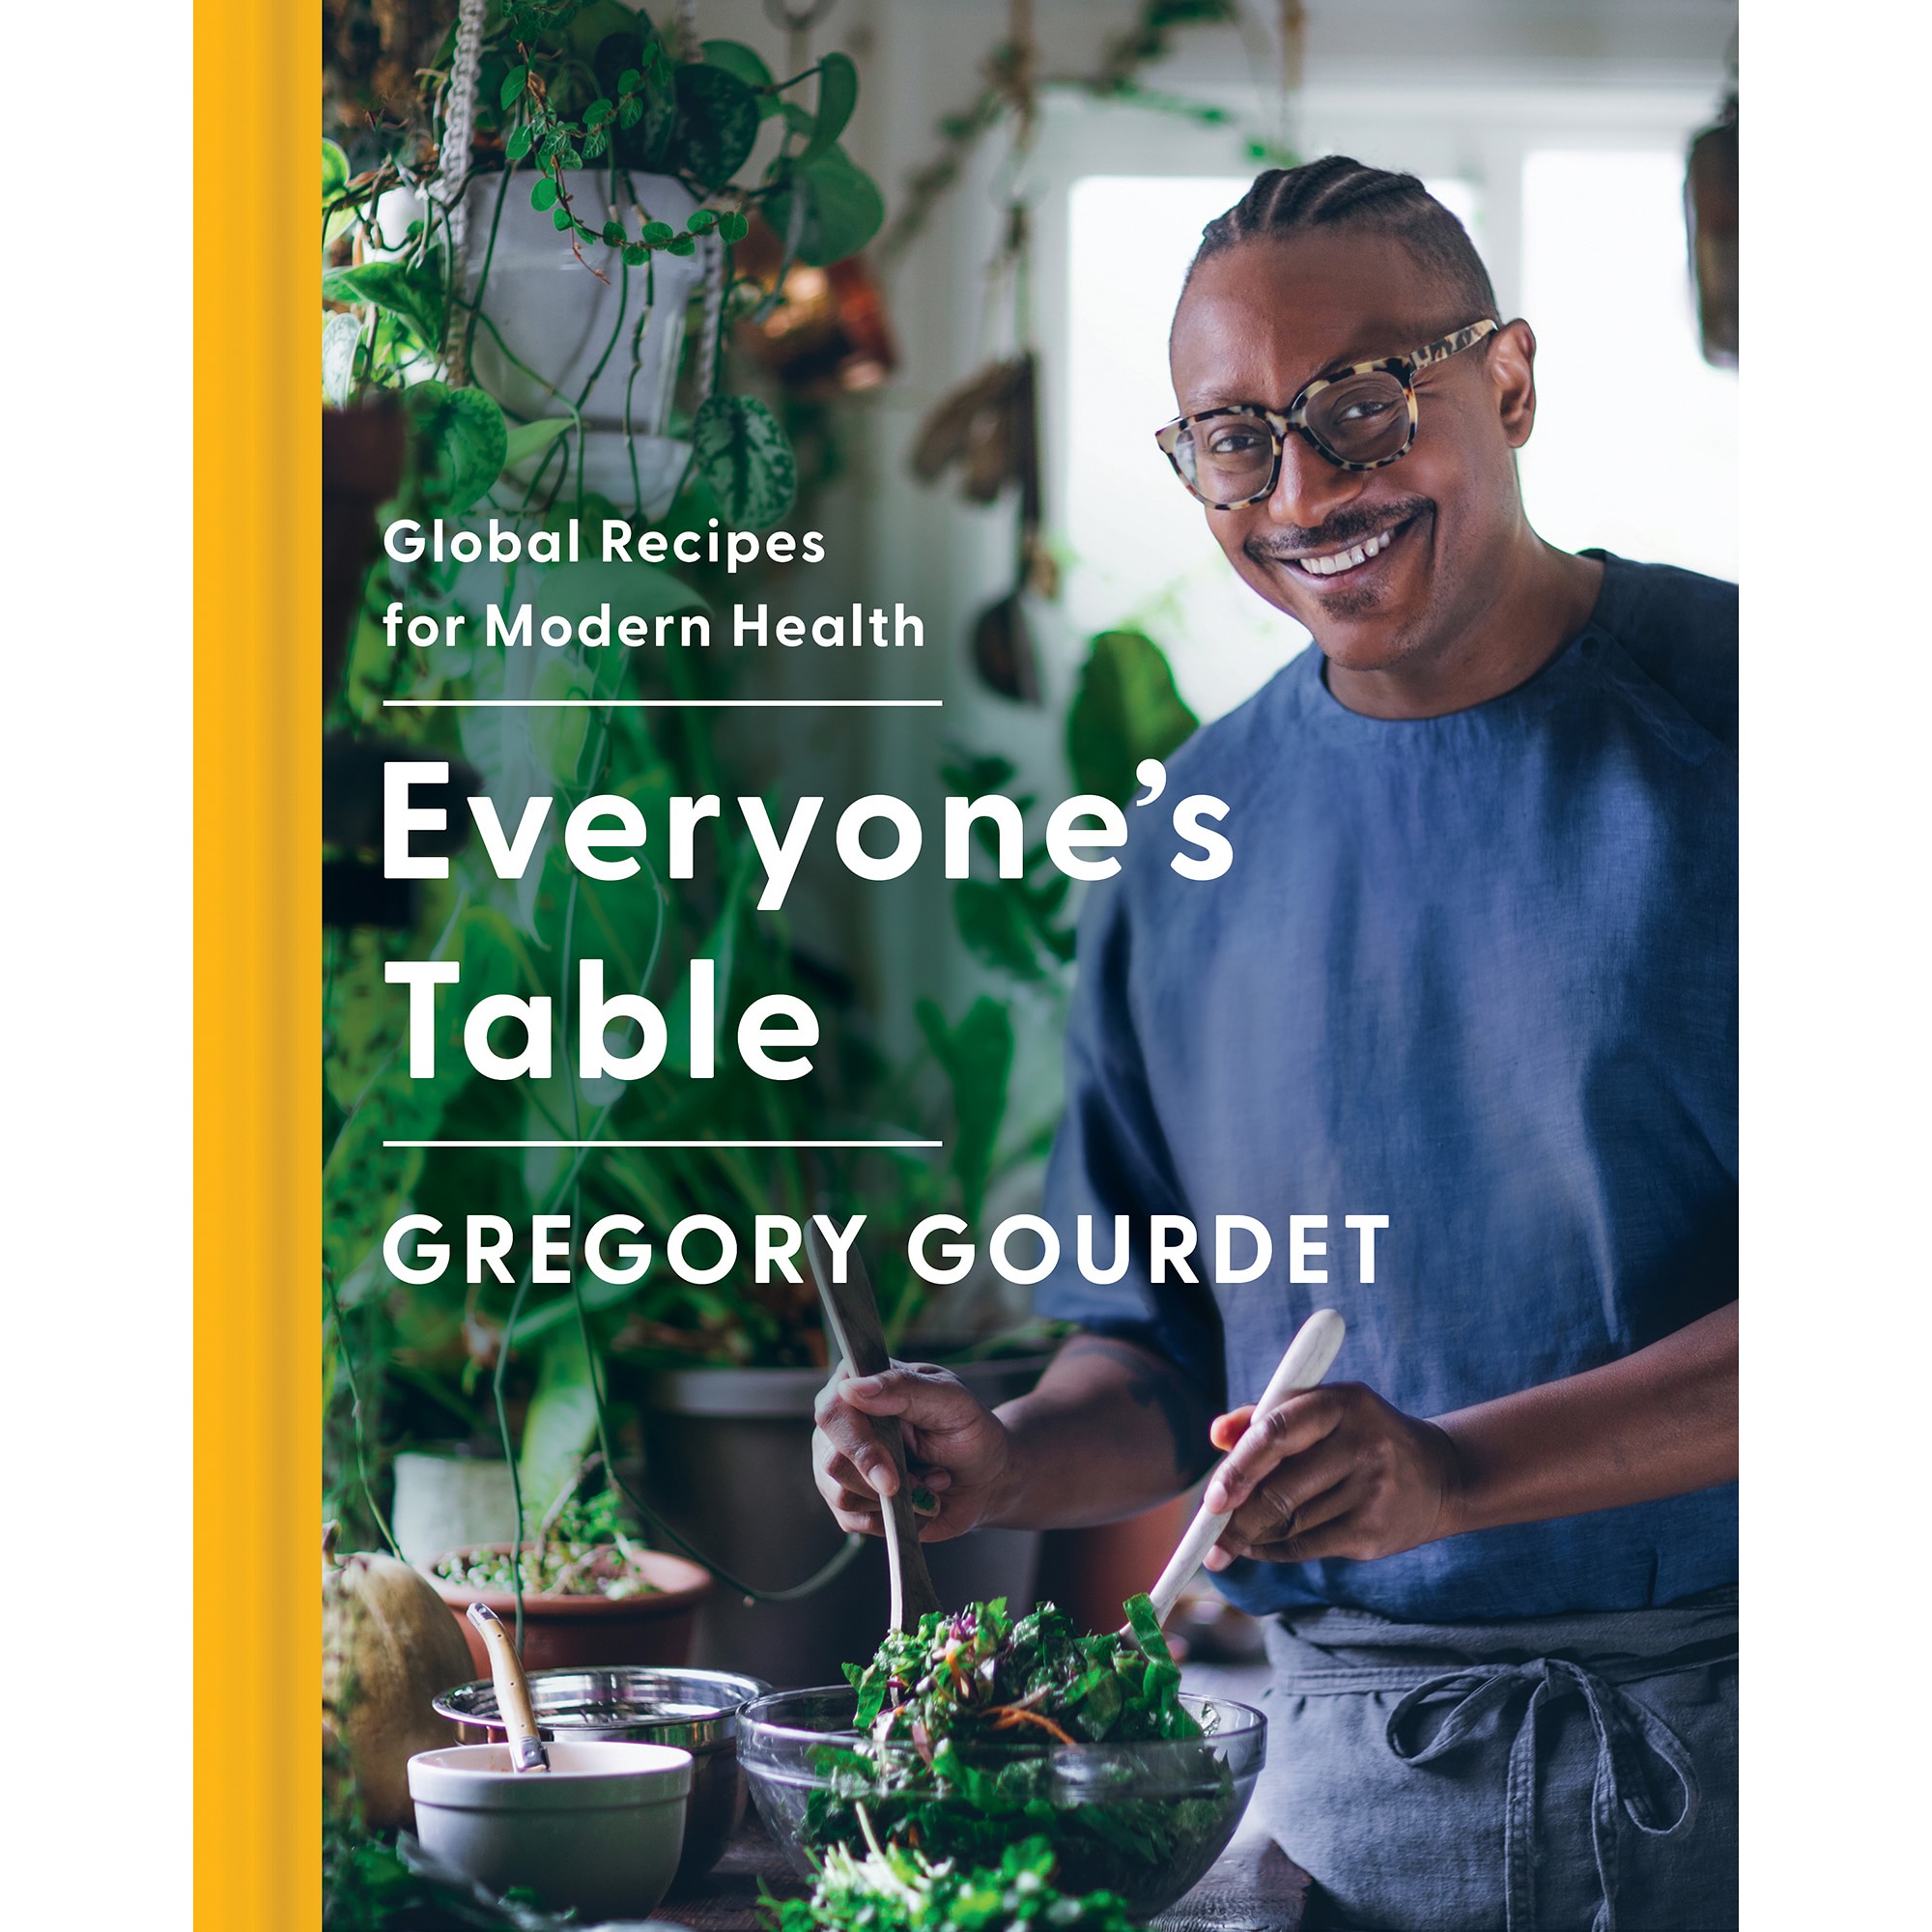 Gregory Gourdet: Everyone's Table